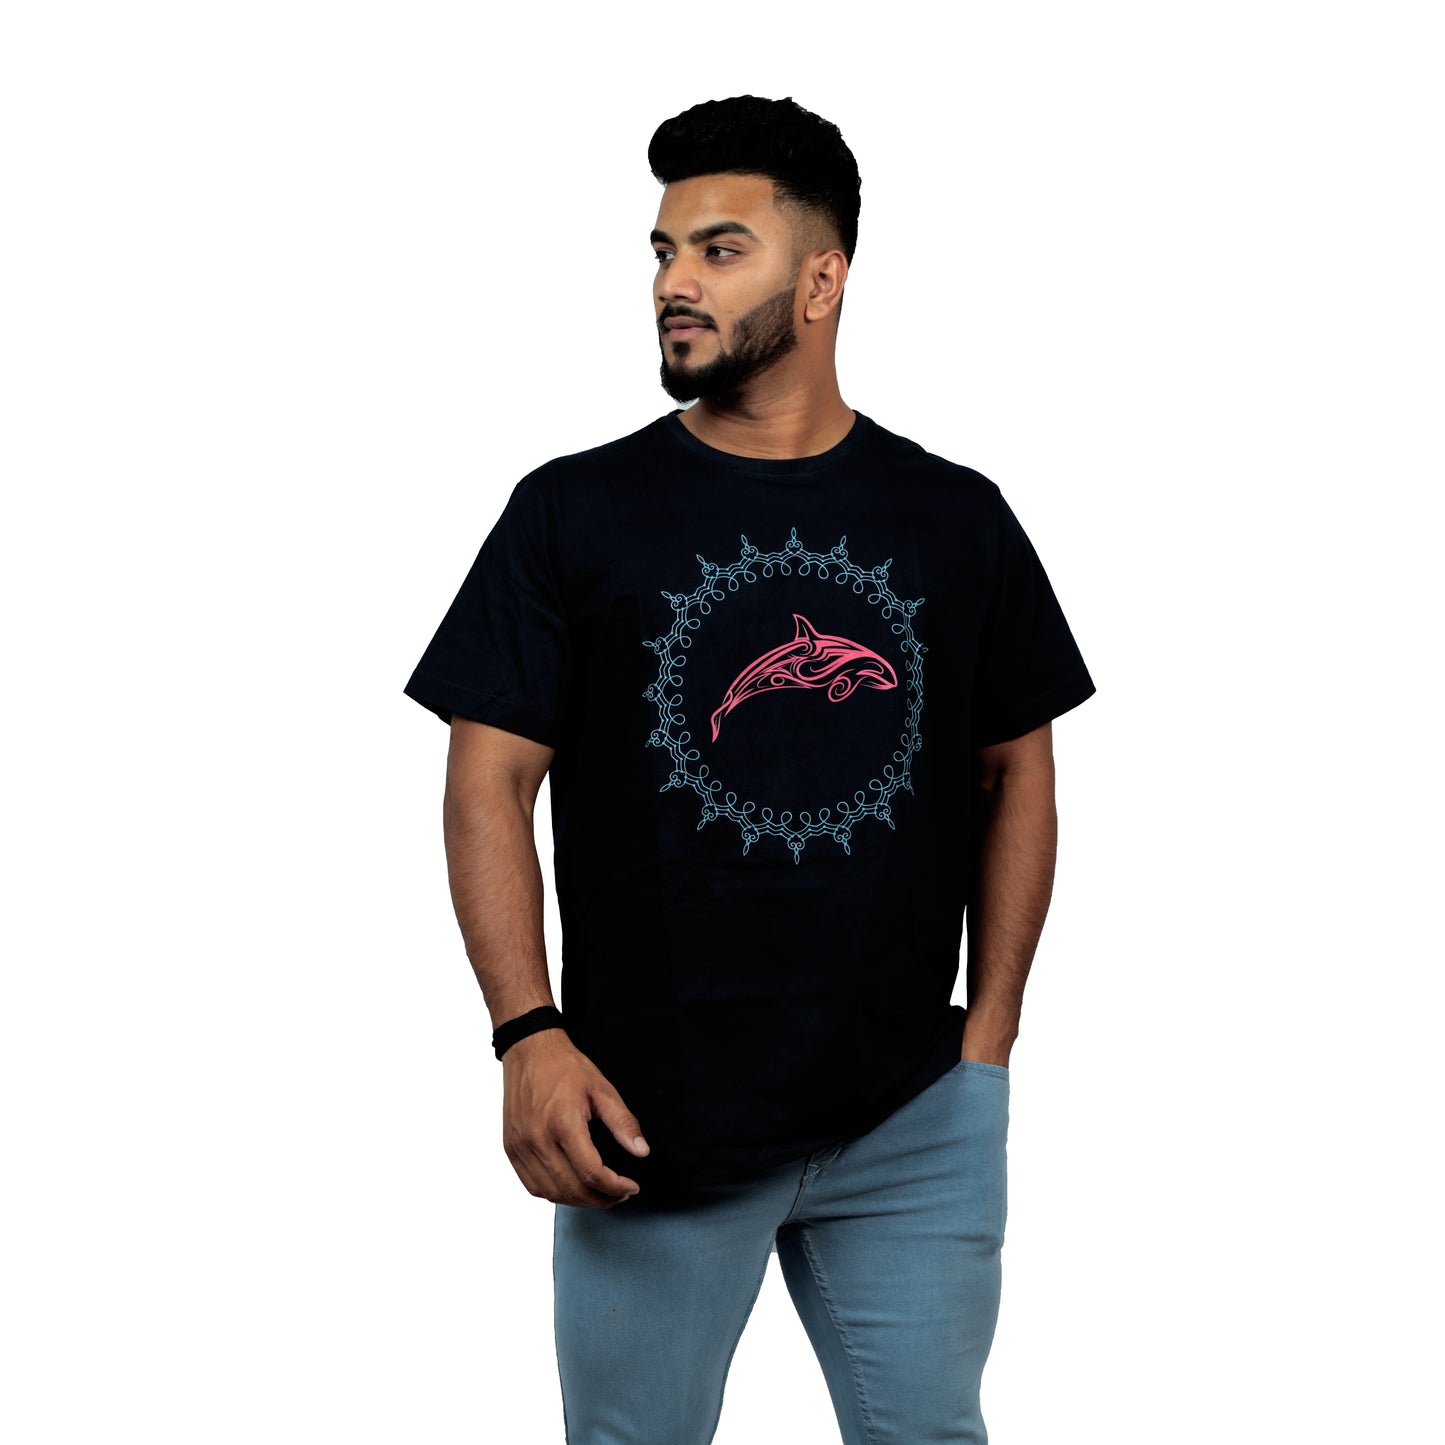 Nirvana Orca Printed T-shirt Navy Blue Color For Men